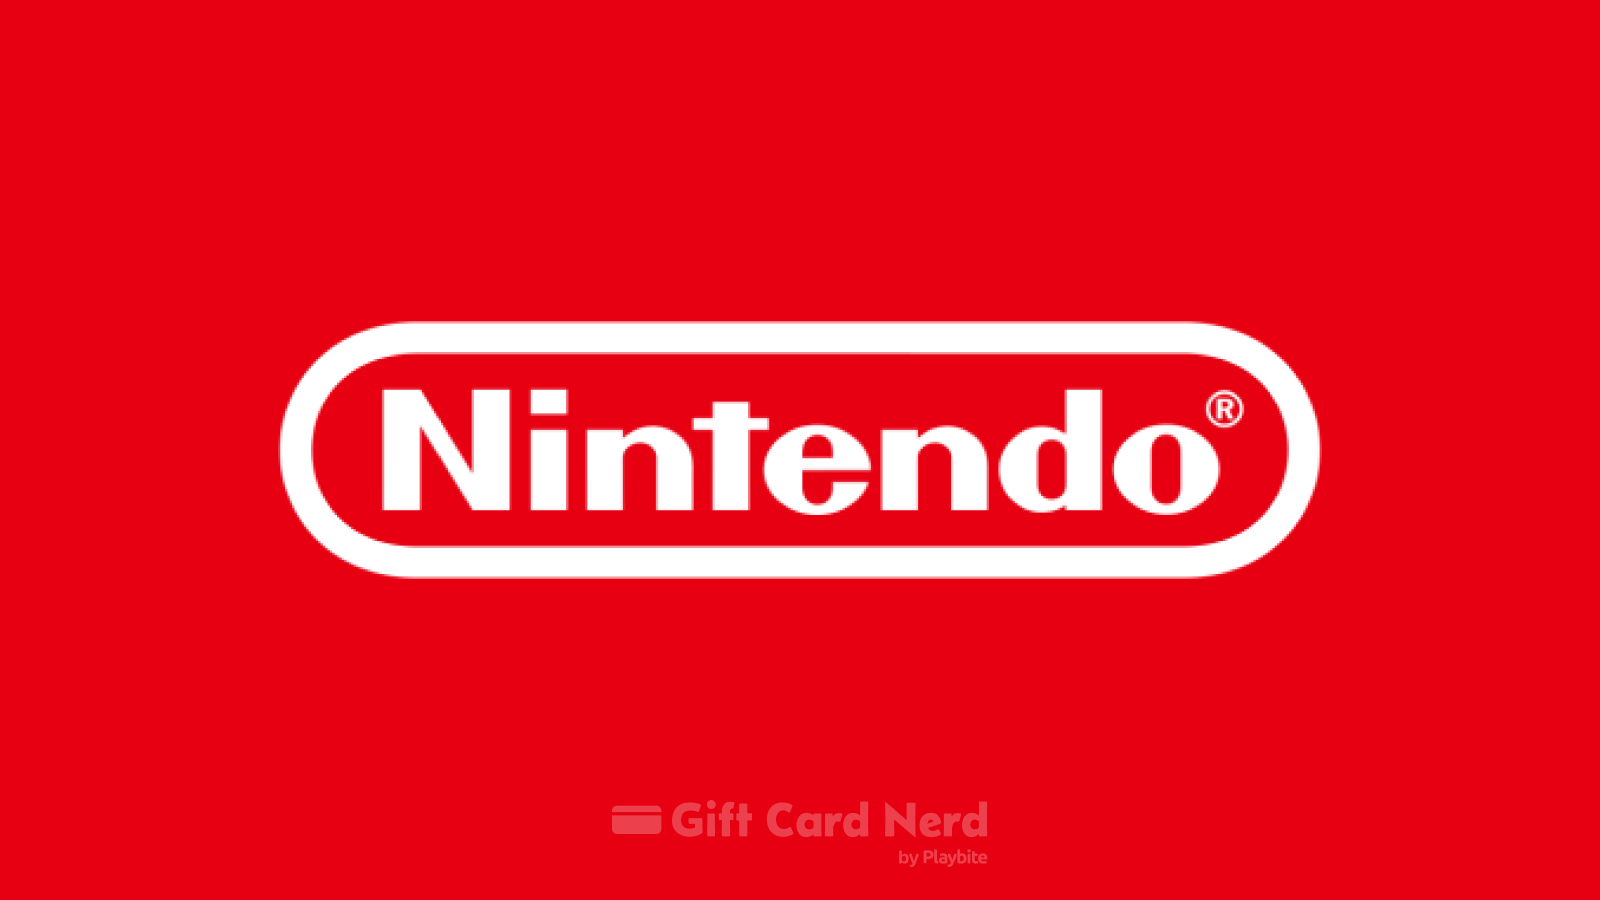 Can You Use a Nintendo Gift Card on Apple Wallet?